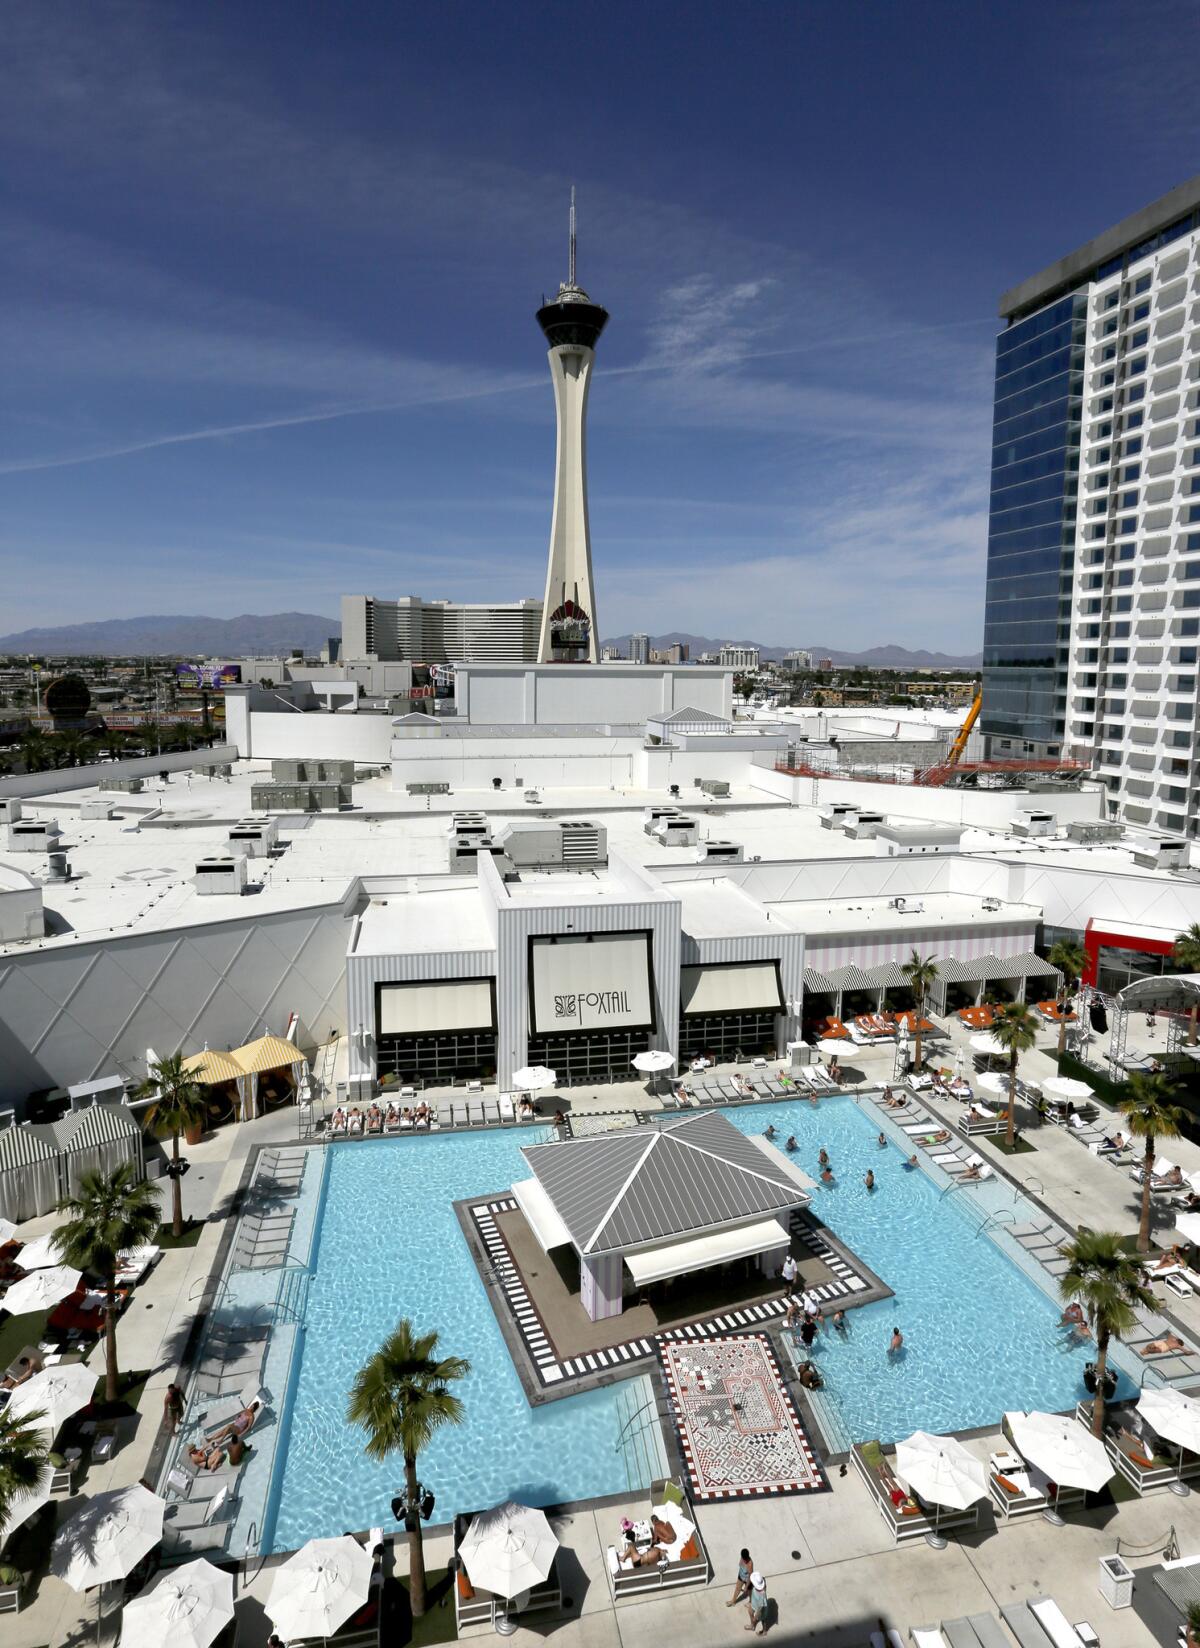 Foxtail Pool at SLS Las Vegas features live entertainment on weekends.